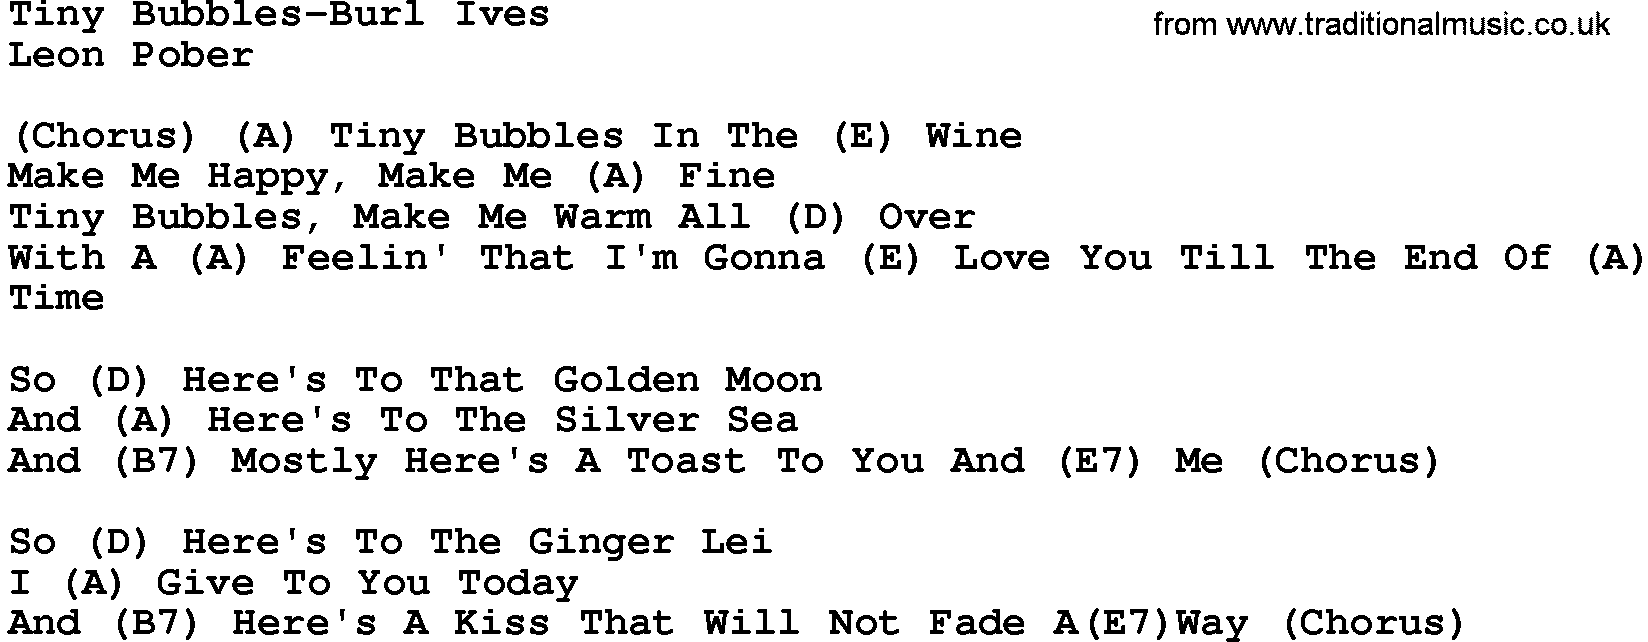 Country music song: Tiny Bubbles-Burl Ives lyrics and chords